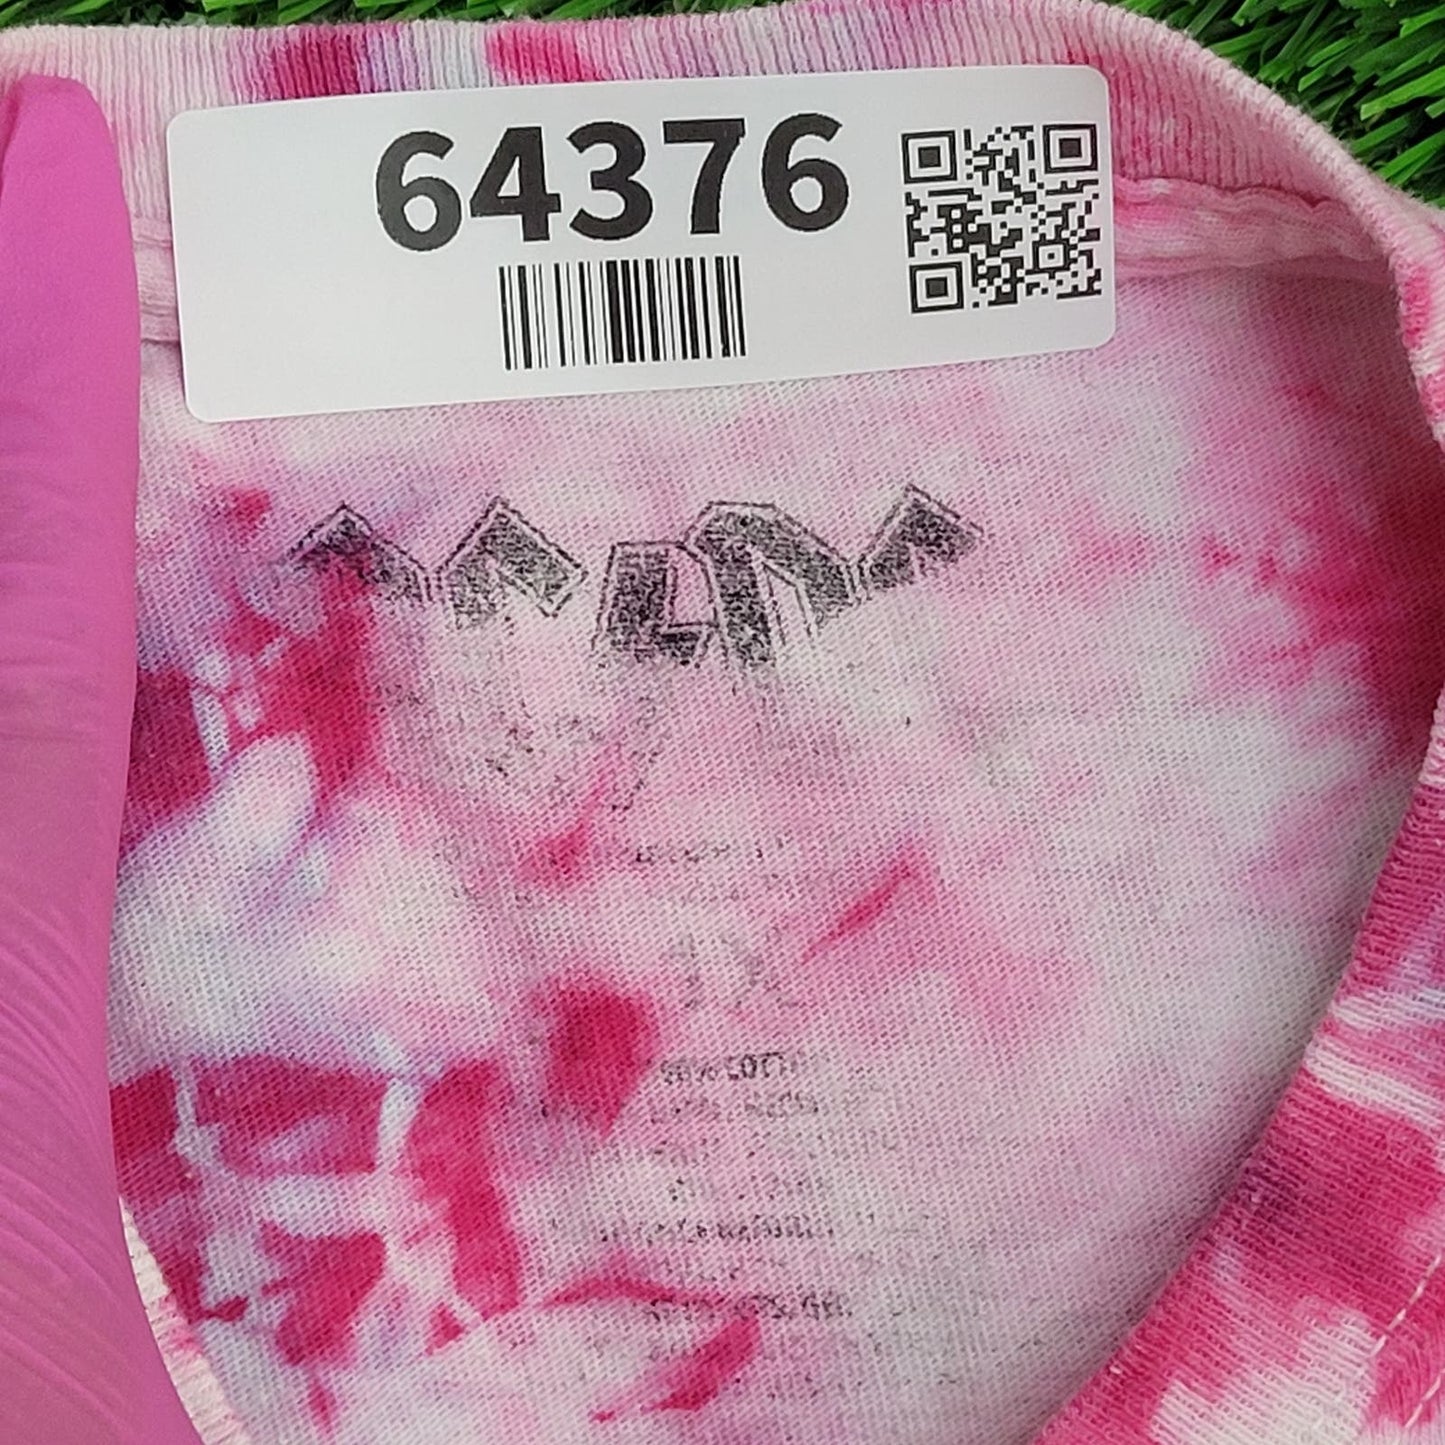 1981 ACDC Rock Band Crumpled Tie-Dye Crop-Top Shirt Womens XL 23x20 Spellout